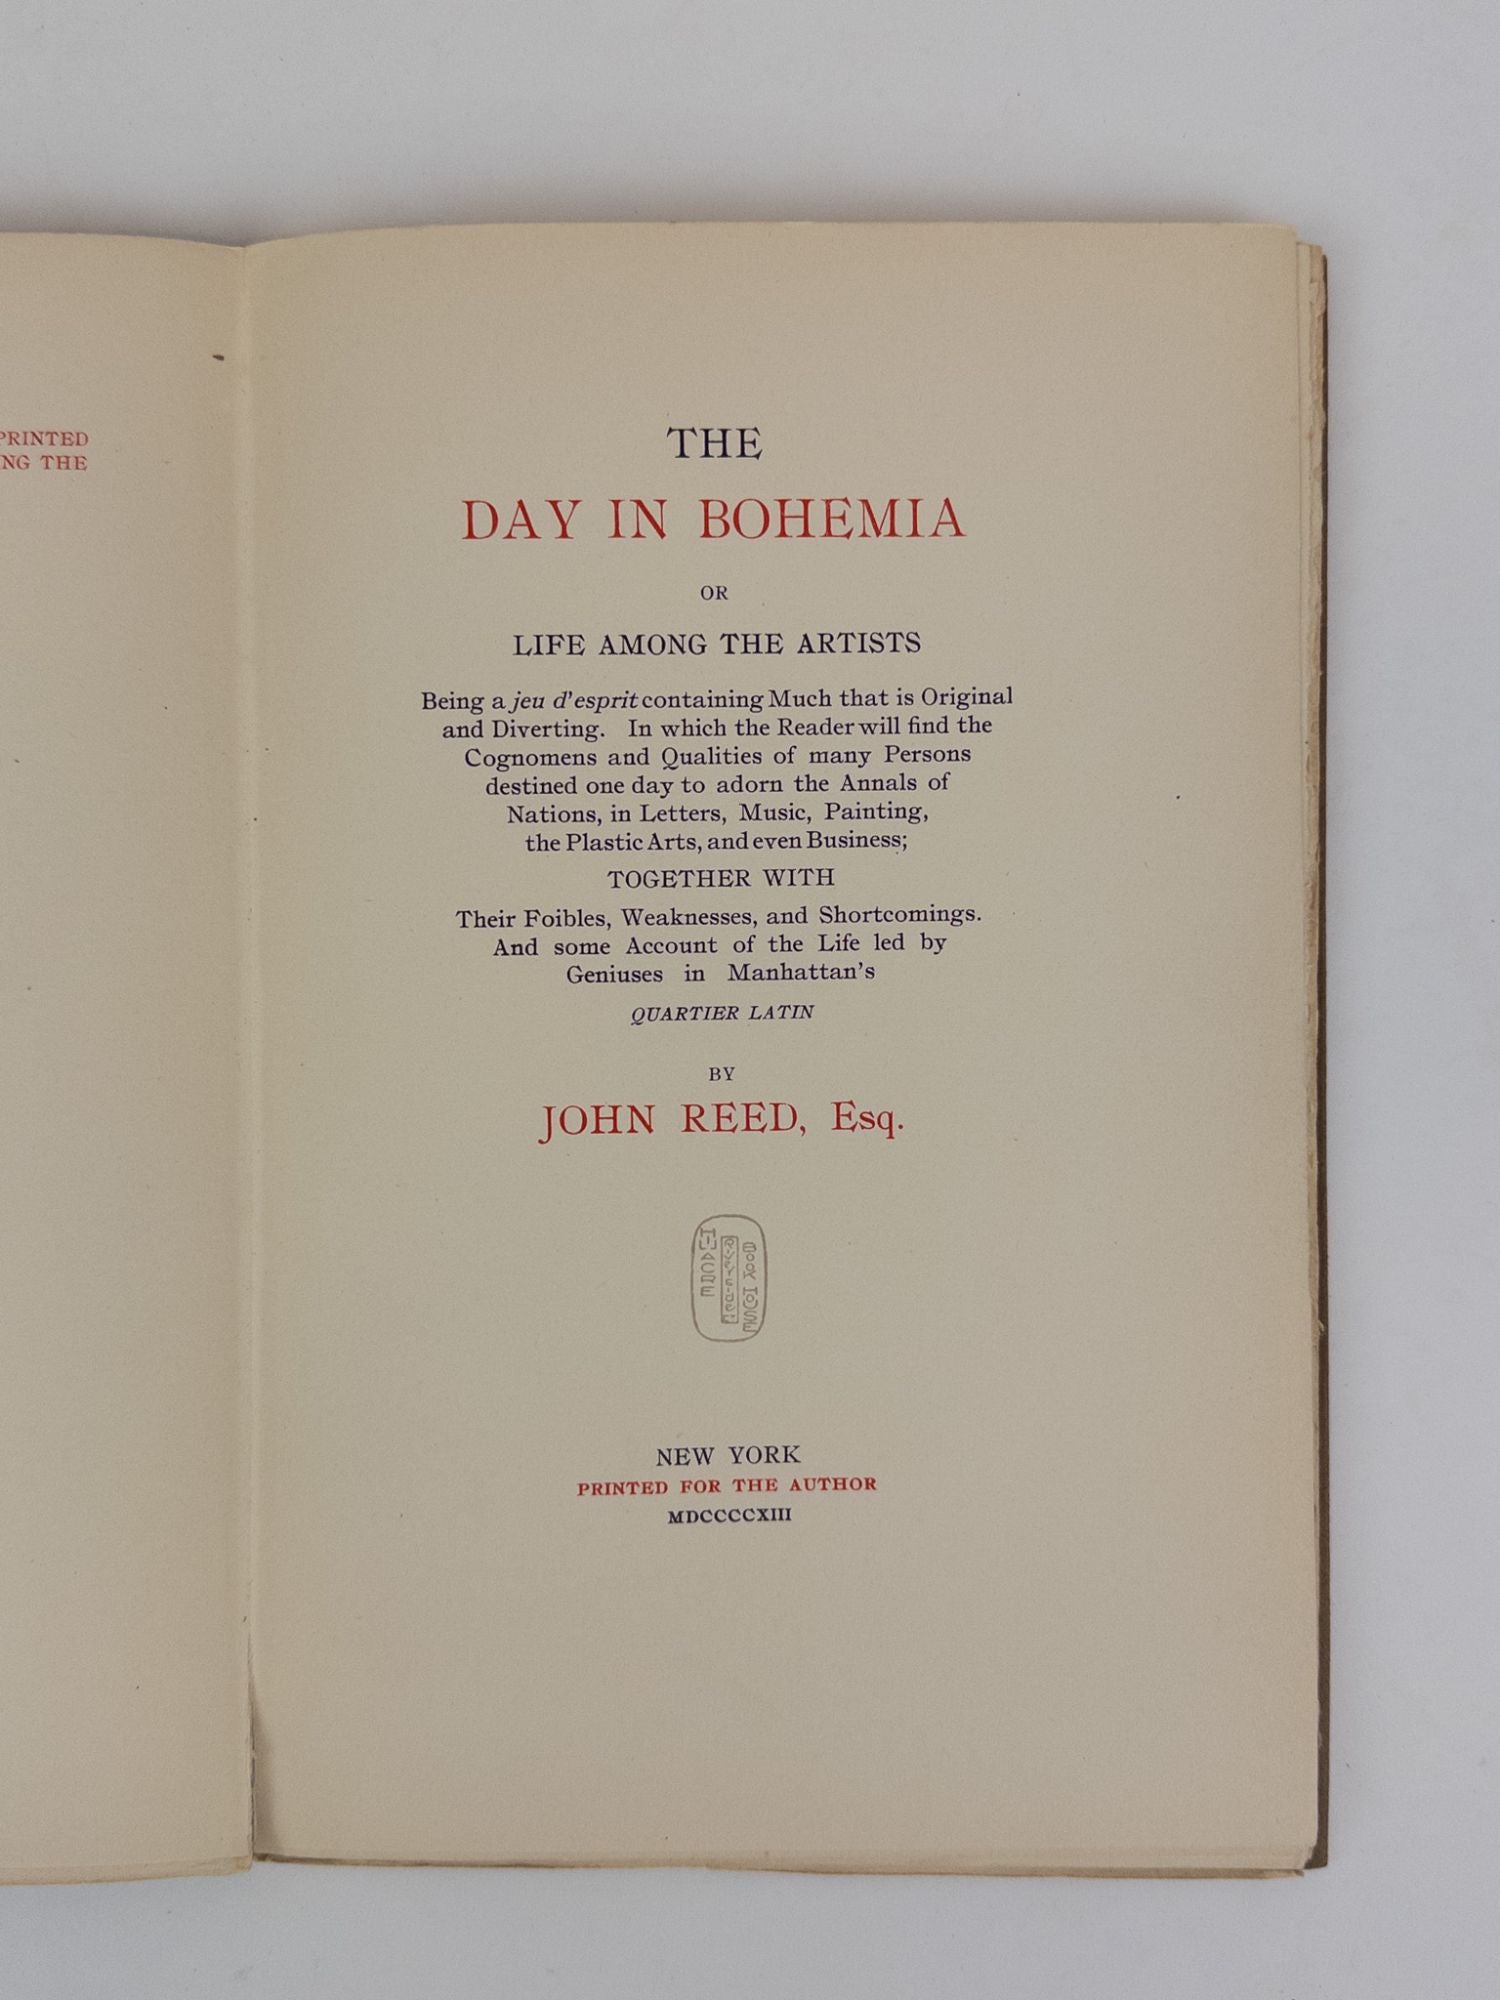 Product Image for THE DAY IN BOHEMIA: OR, LIFE AMONG THE ARTISTS